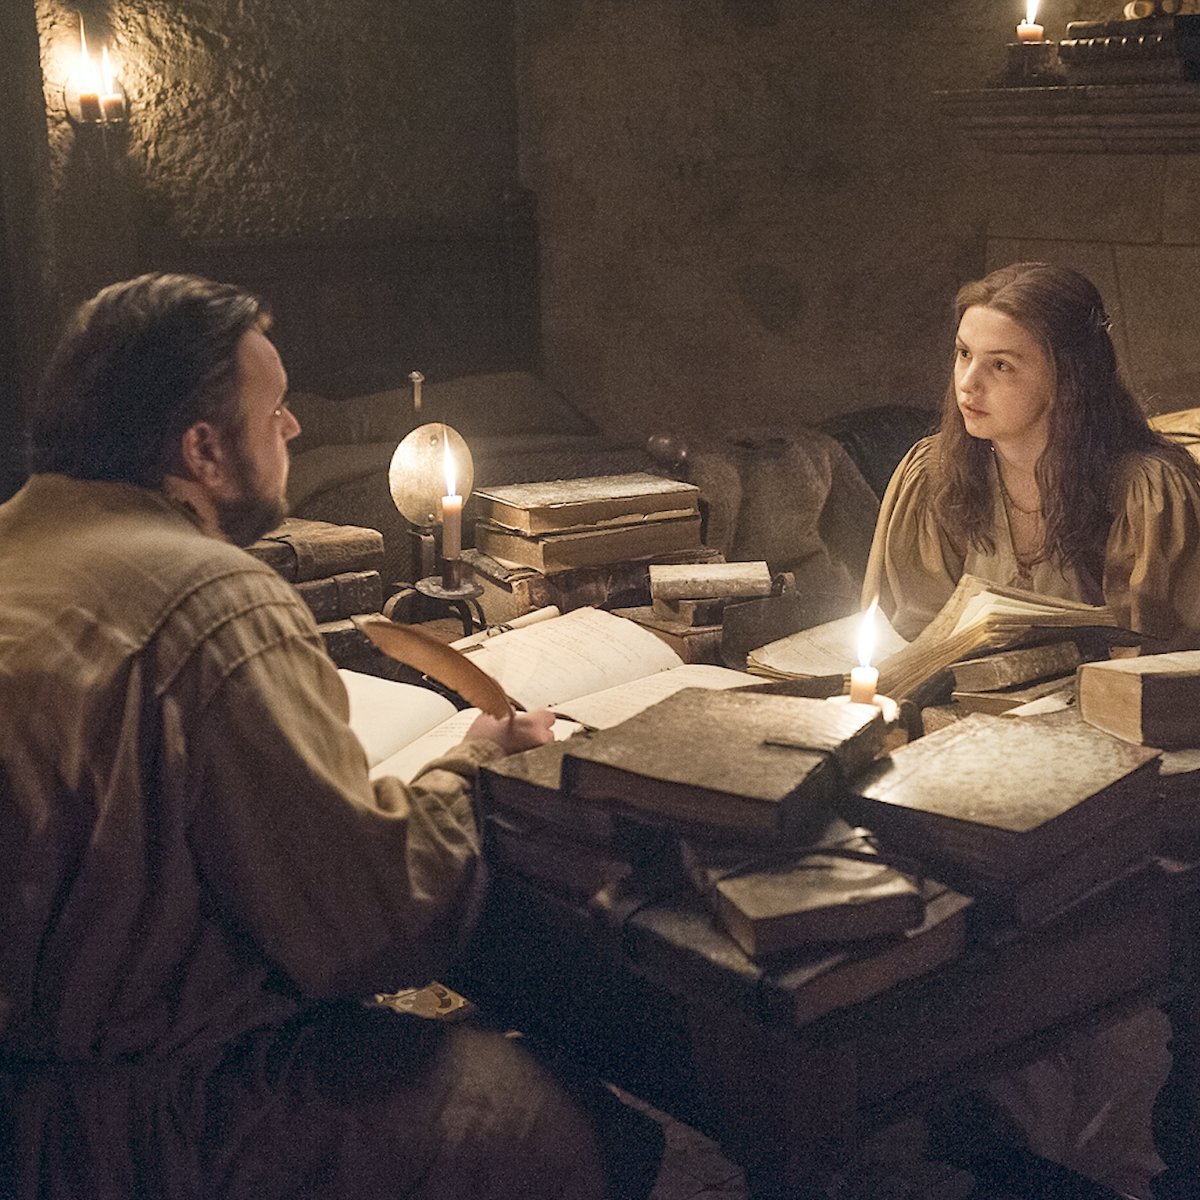 Game of Thrones season 7 episode 5, 'Eastwatch': Gilly studies with Sam at the Citadel